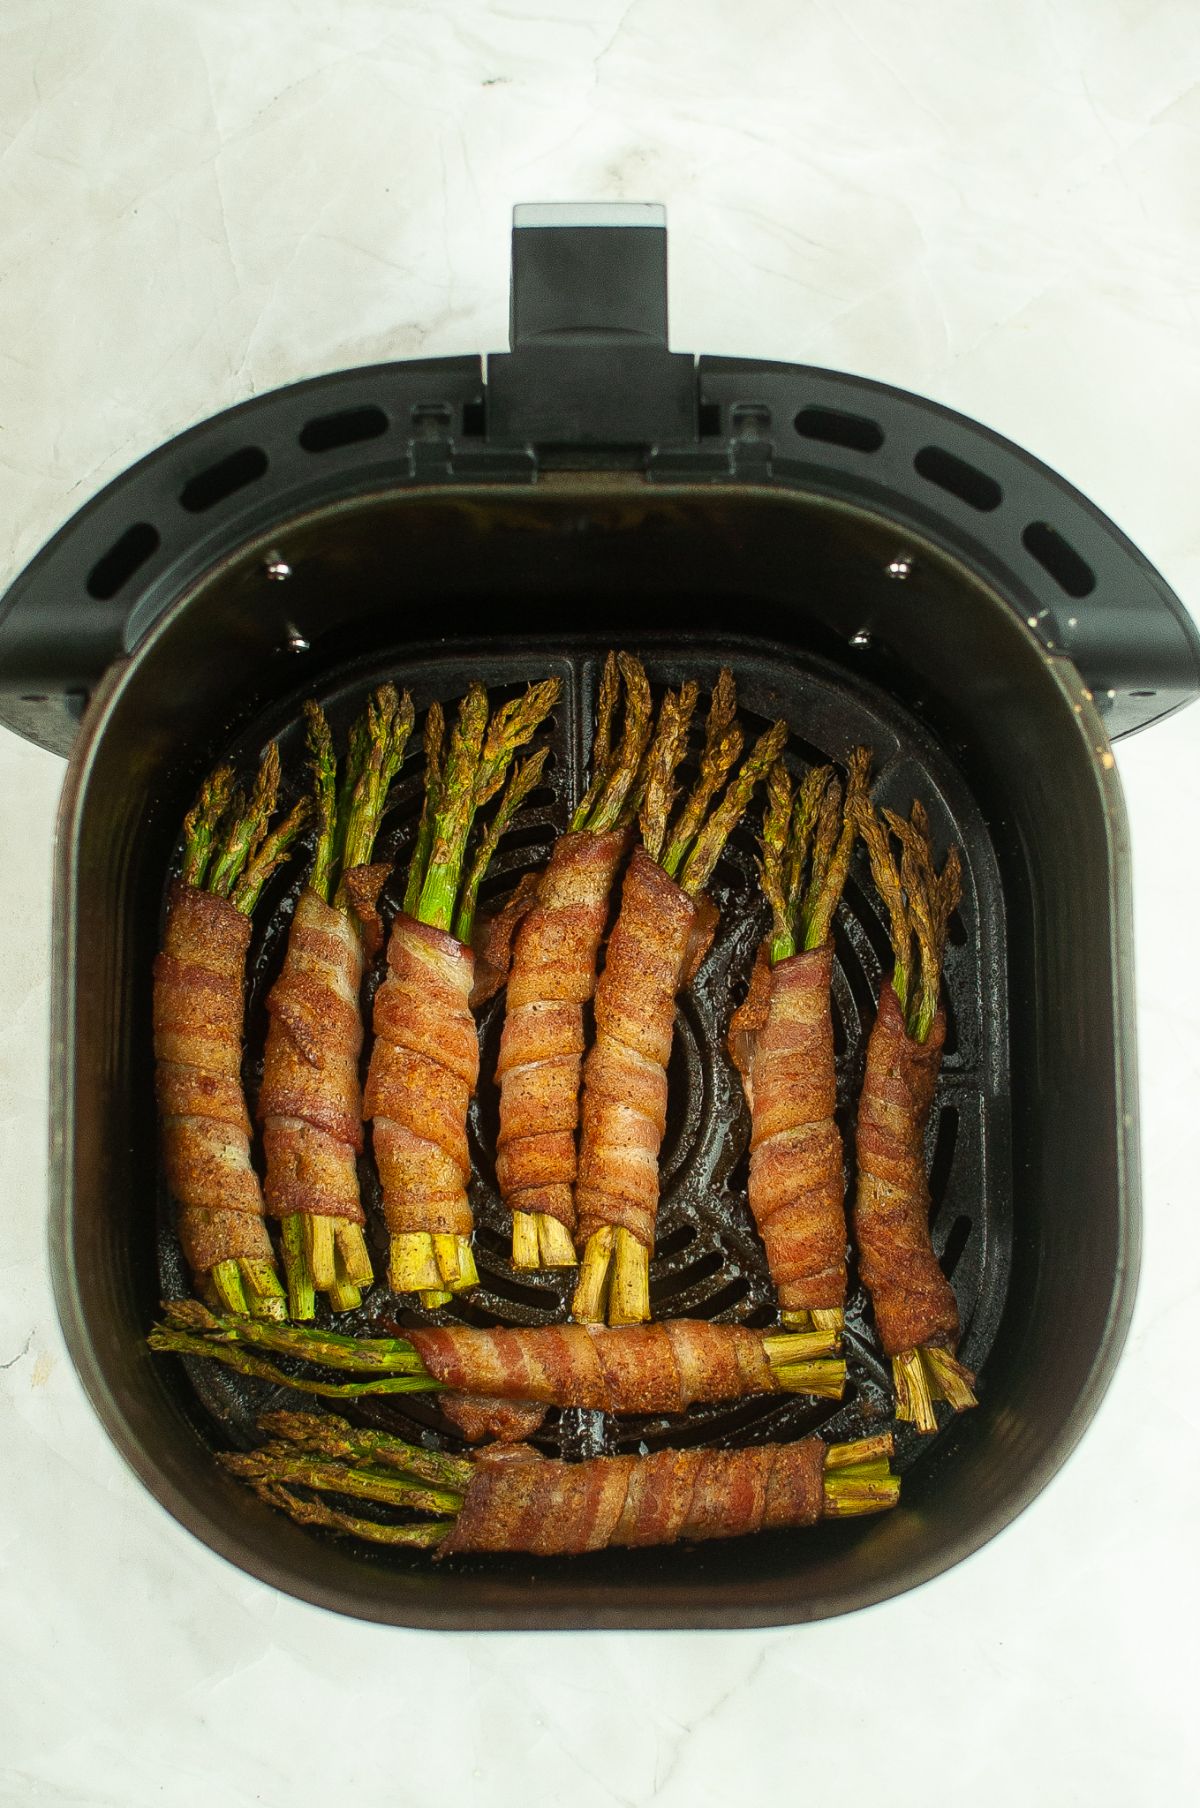 Bacon wrapped asparagus inside the Air Fryer.